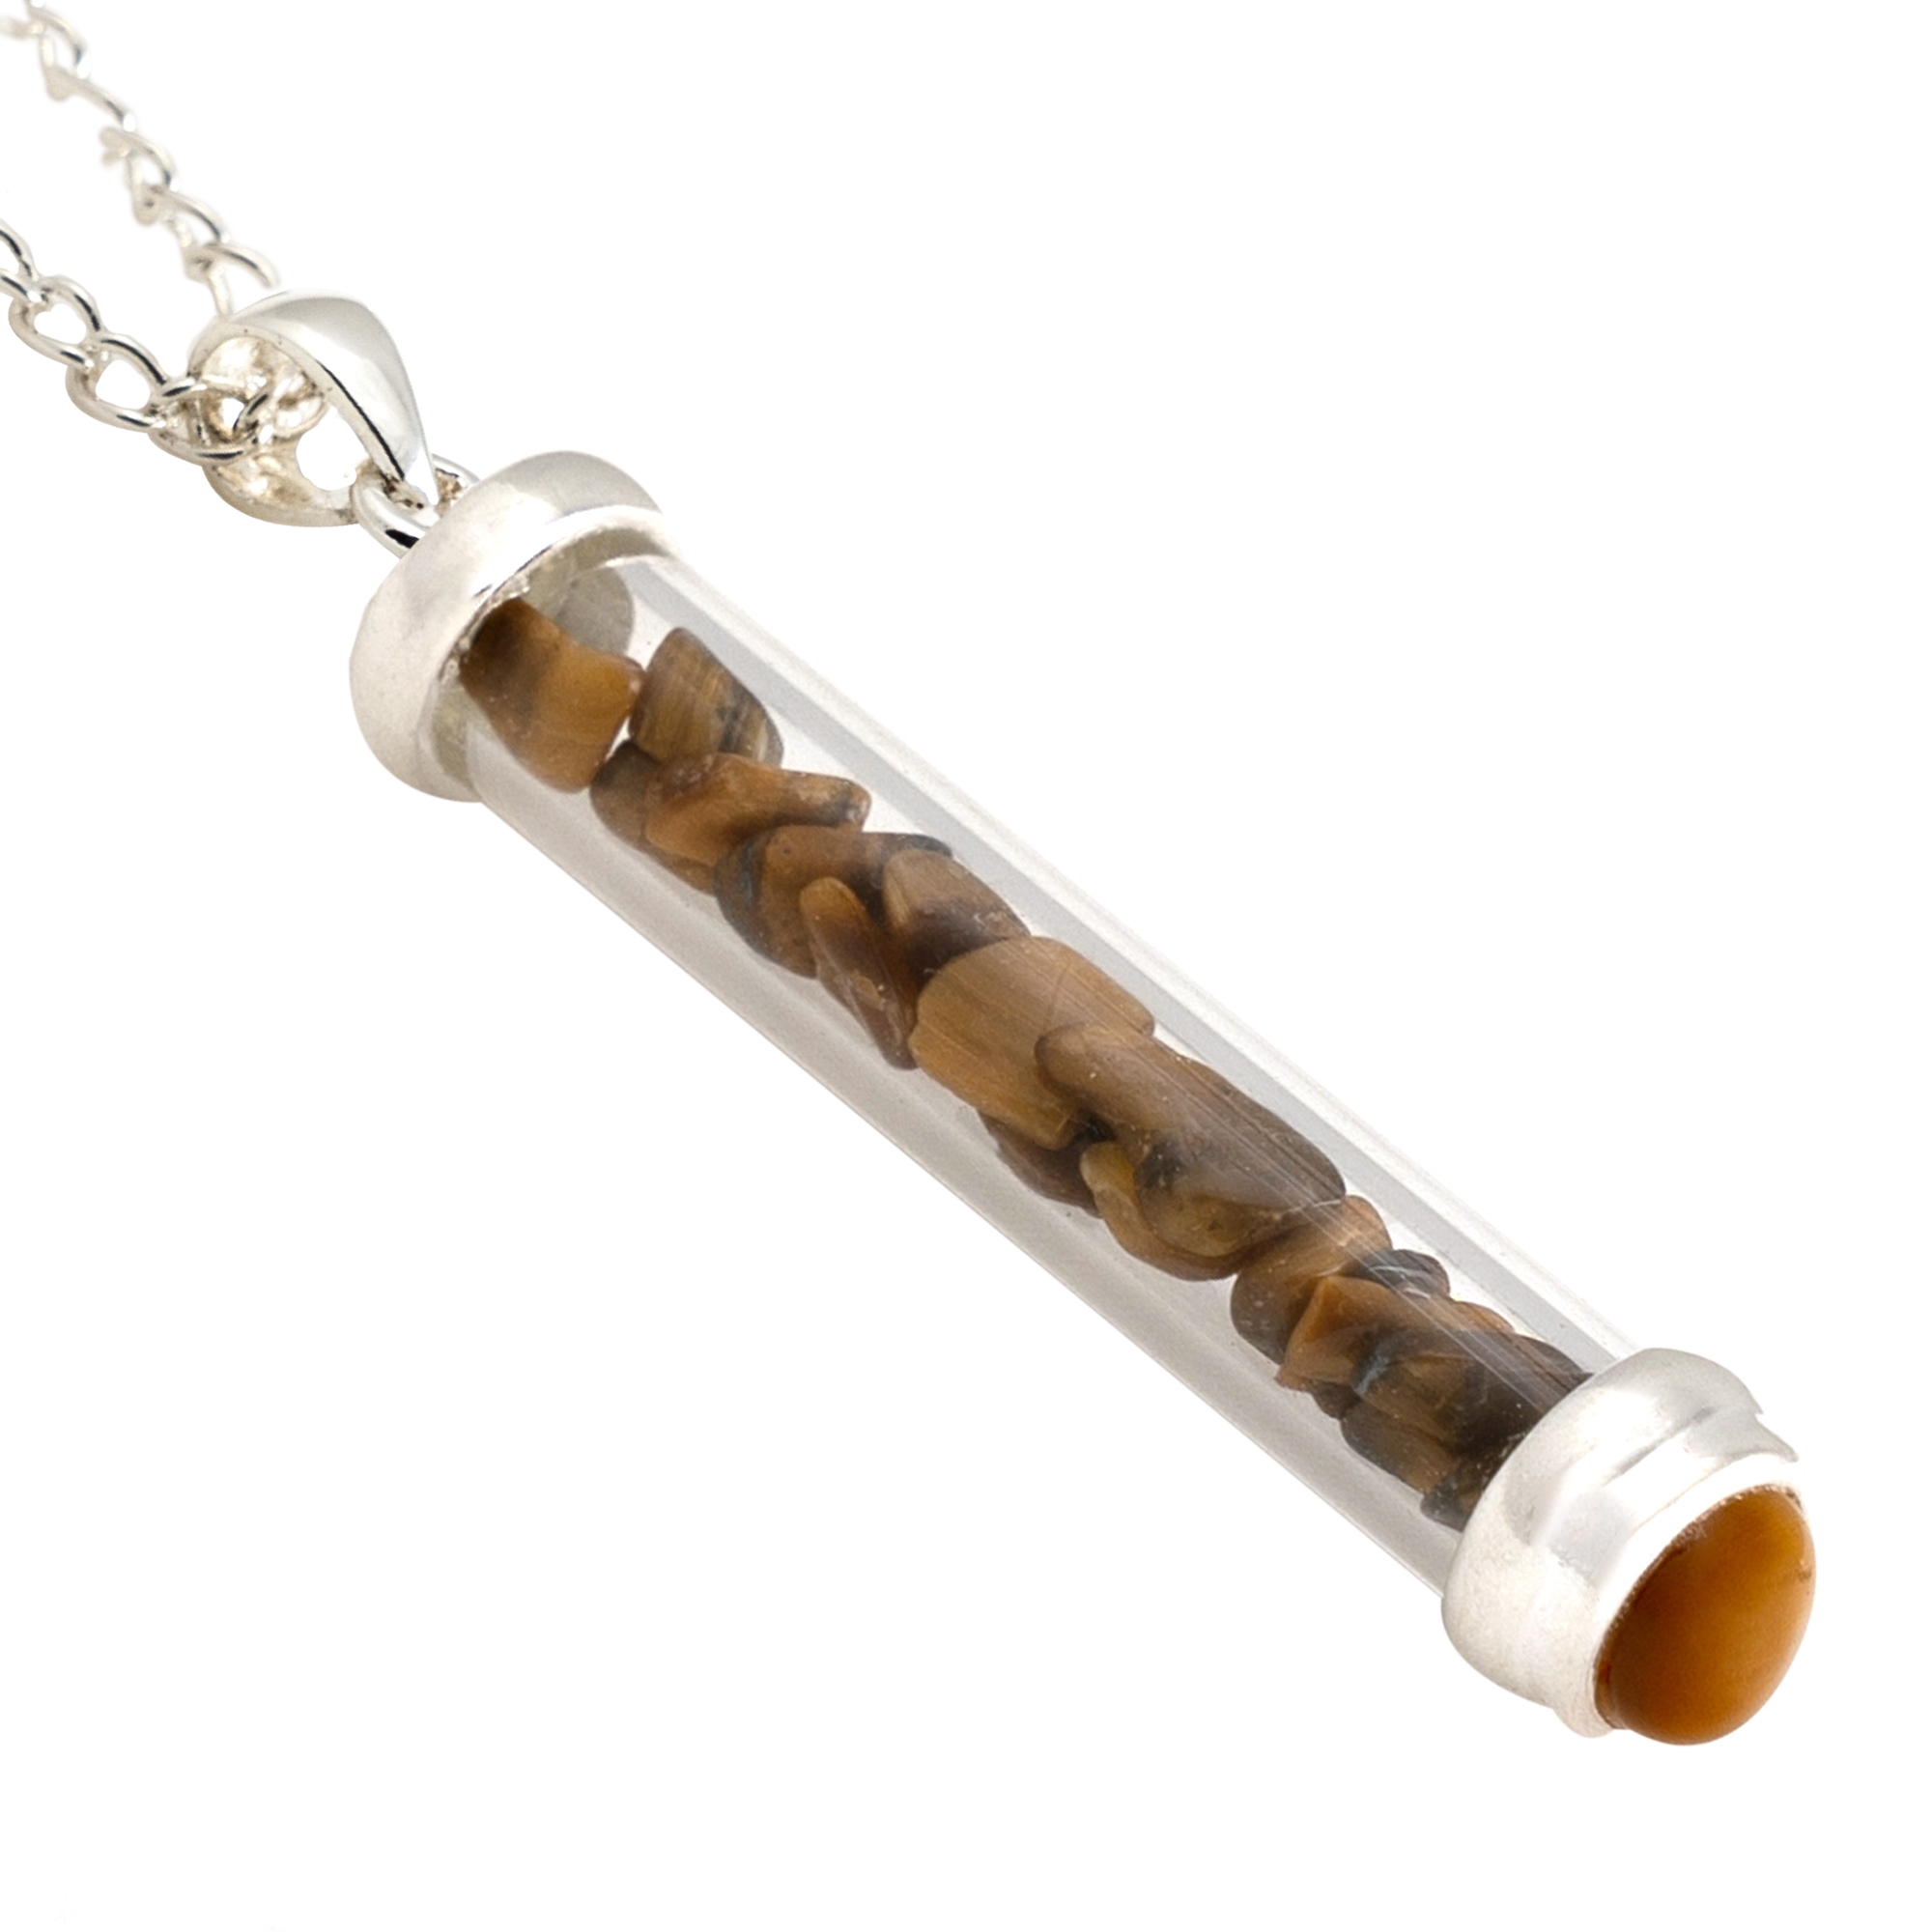 TIGER EYE GEM POWER VIAL PENDANT FOR COURAGE - Click Image to Close